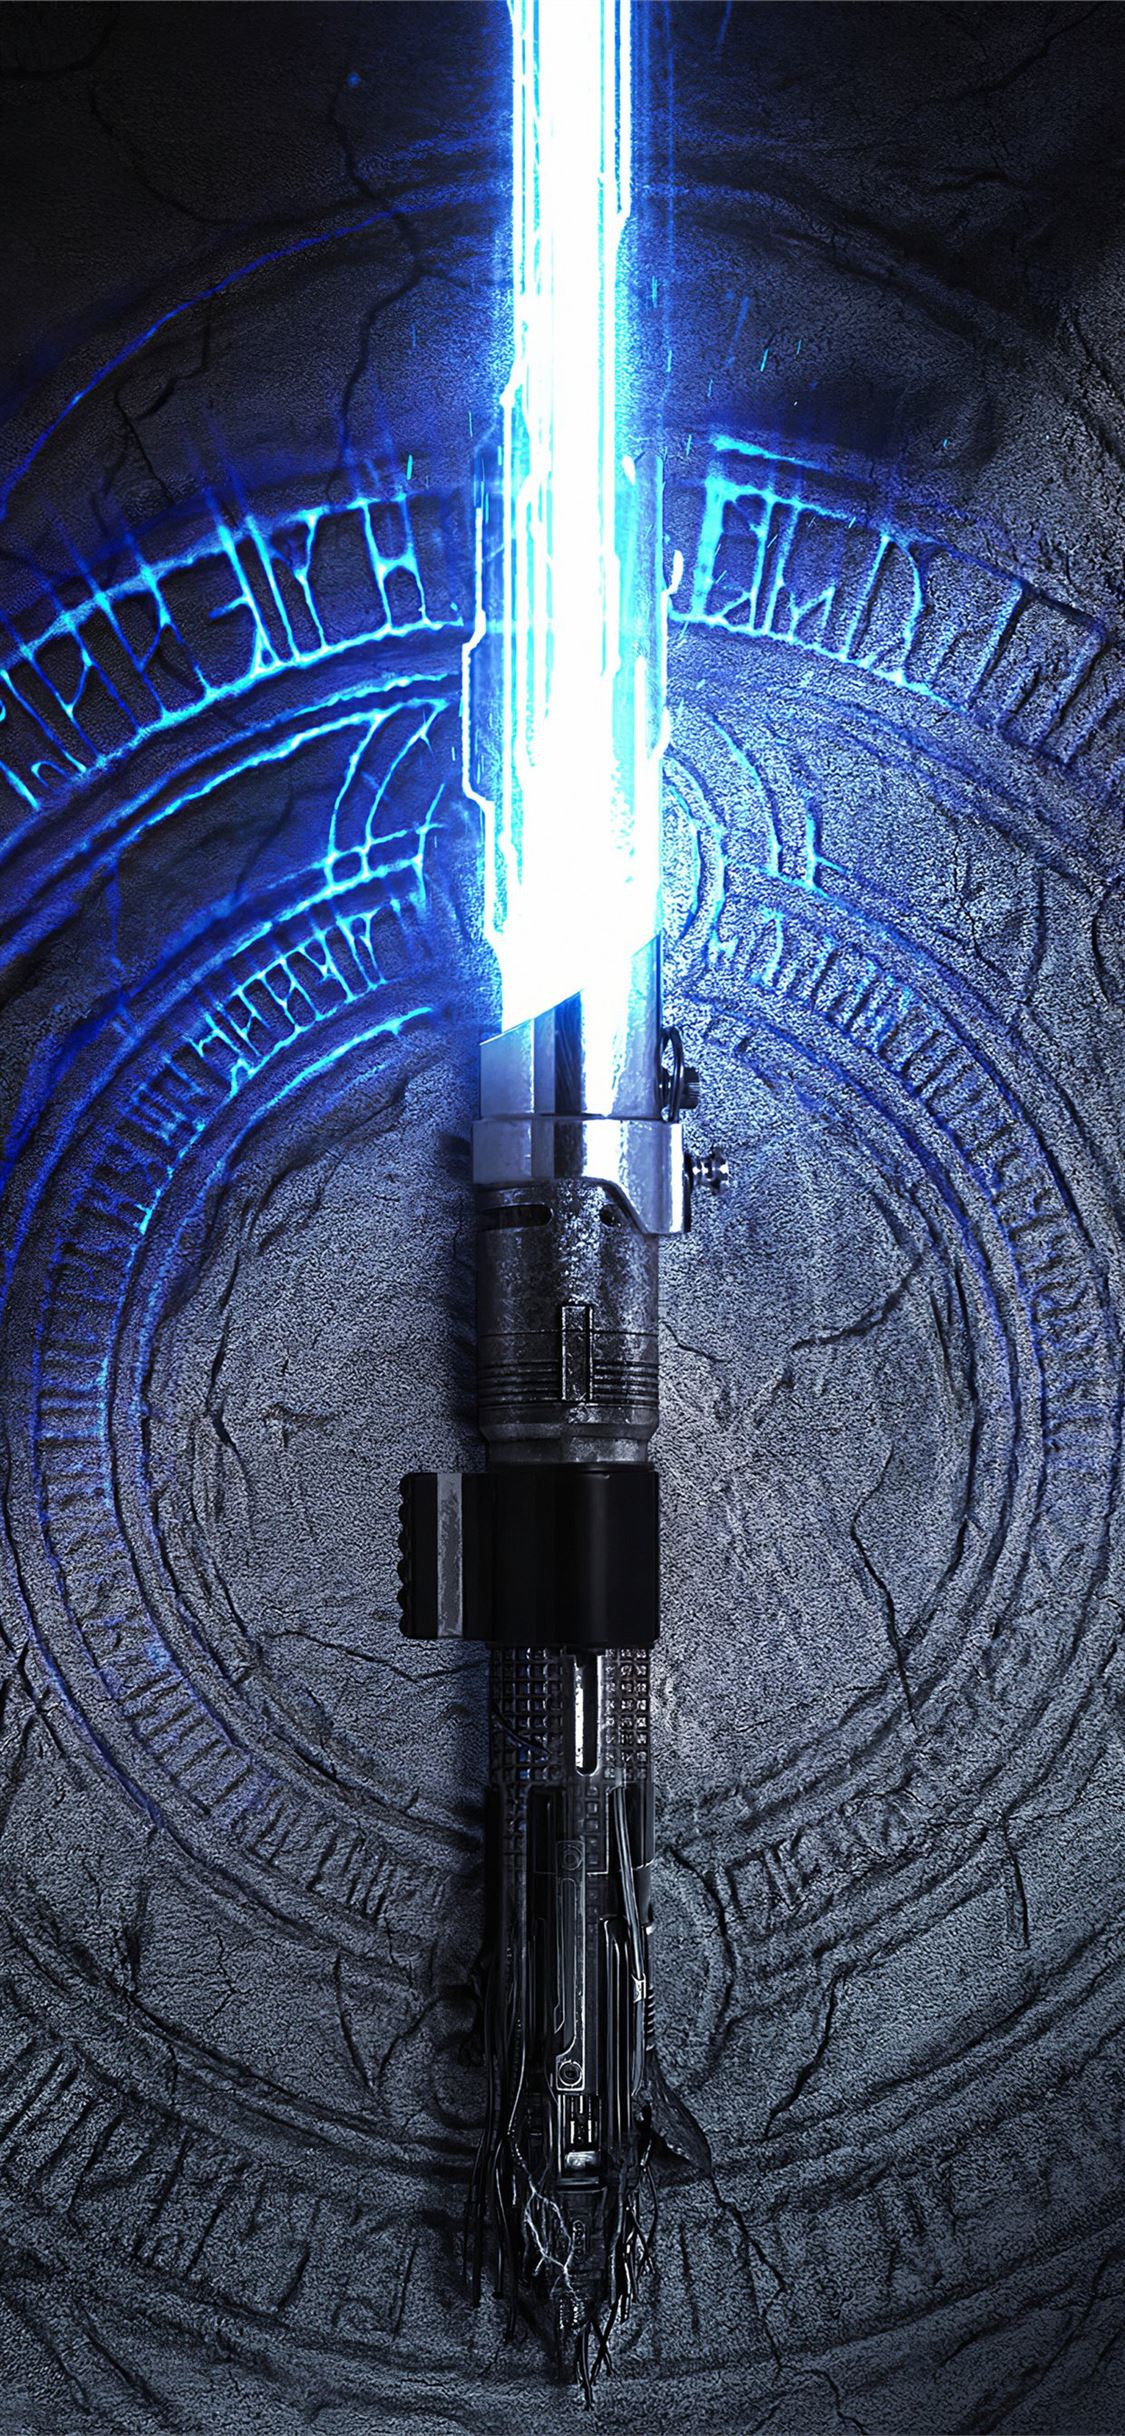 Star Wars Lightsaber Duel Wallpaper iPhone X Wallpapers Free Download